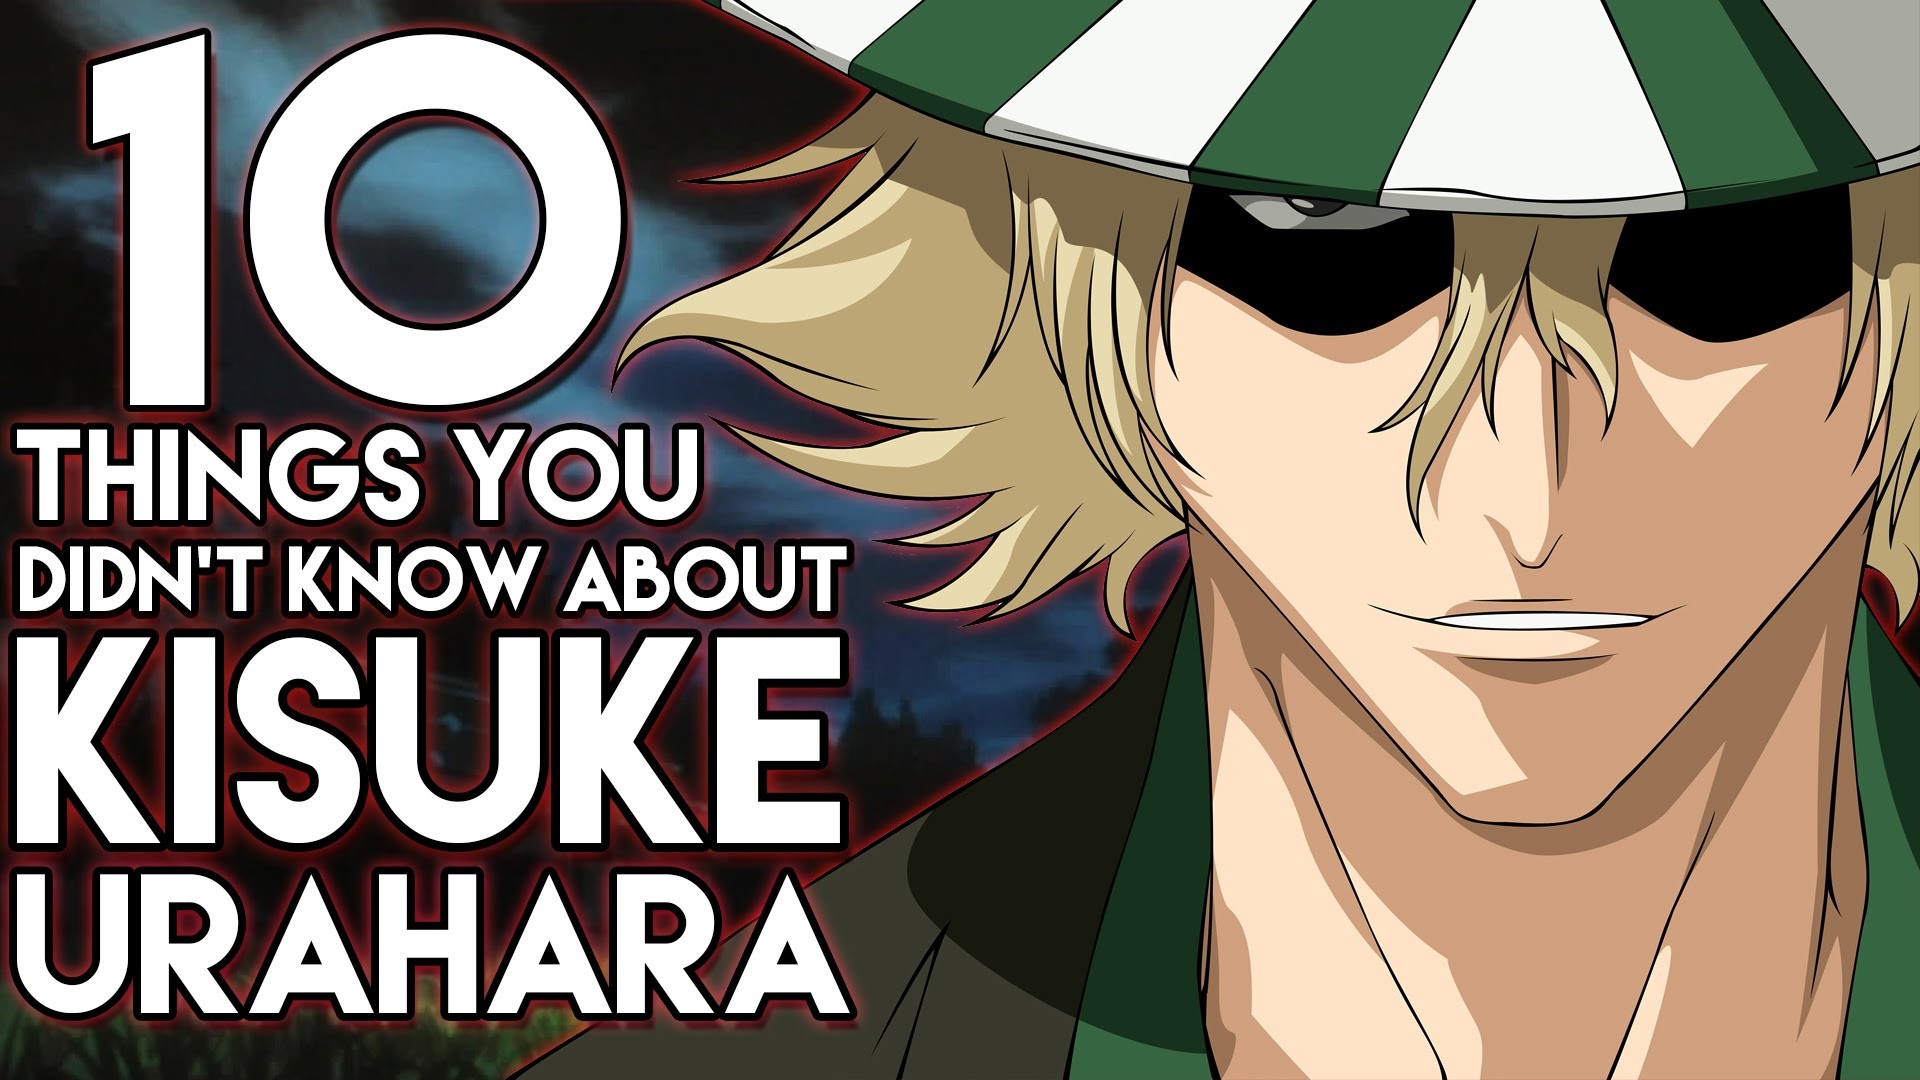 1920x1080 10 Things You Probably Didn't Know About Kisuke Urahara (10 Facts) | Bleach  | The Week Of 10's #1 - YouTube